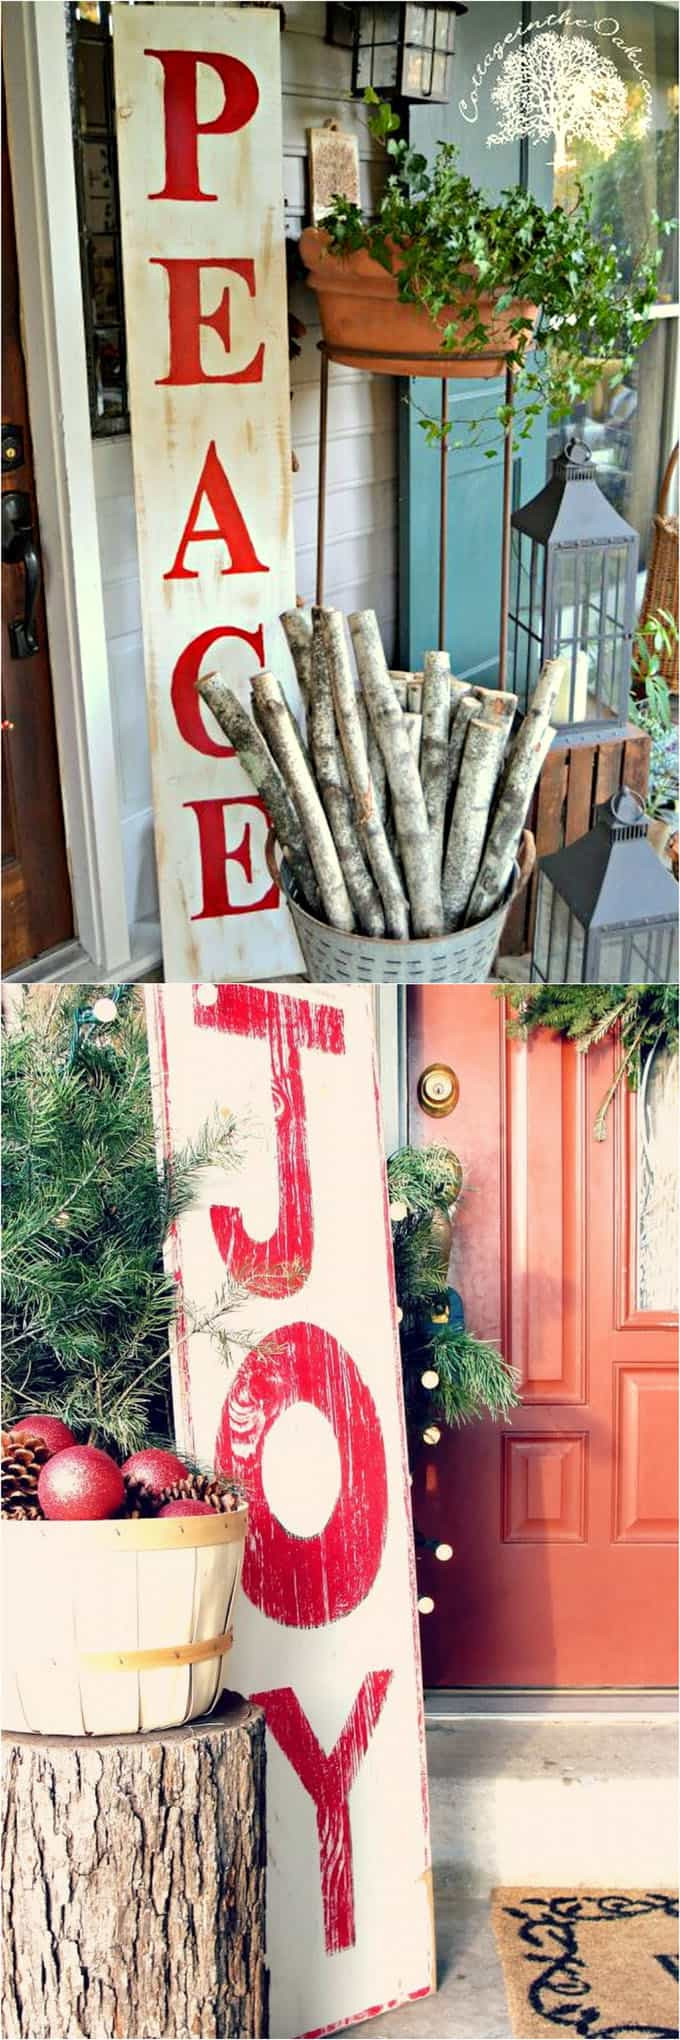 DIY Christmas Decorations Outdoor
 Gorgeous Outdoor Christmas Decorations 32 Best Ideas